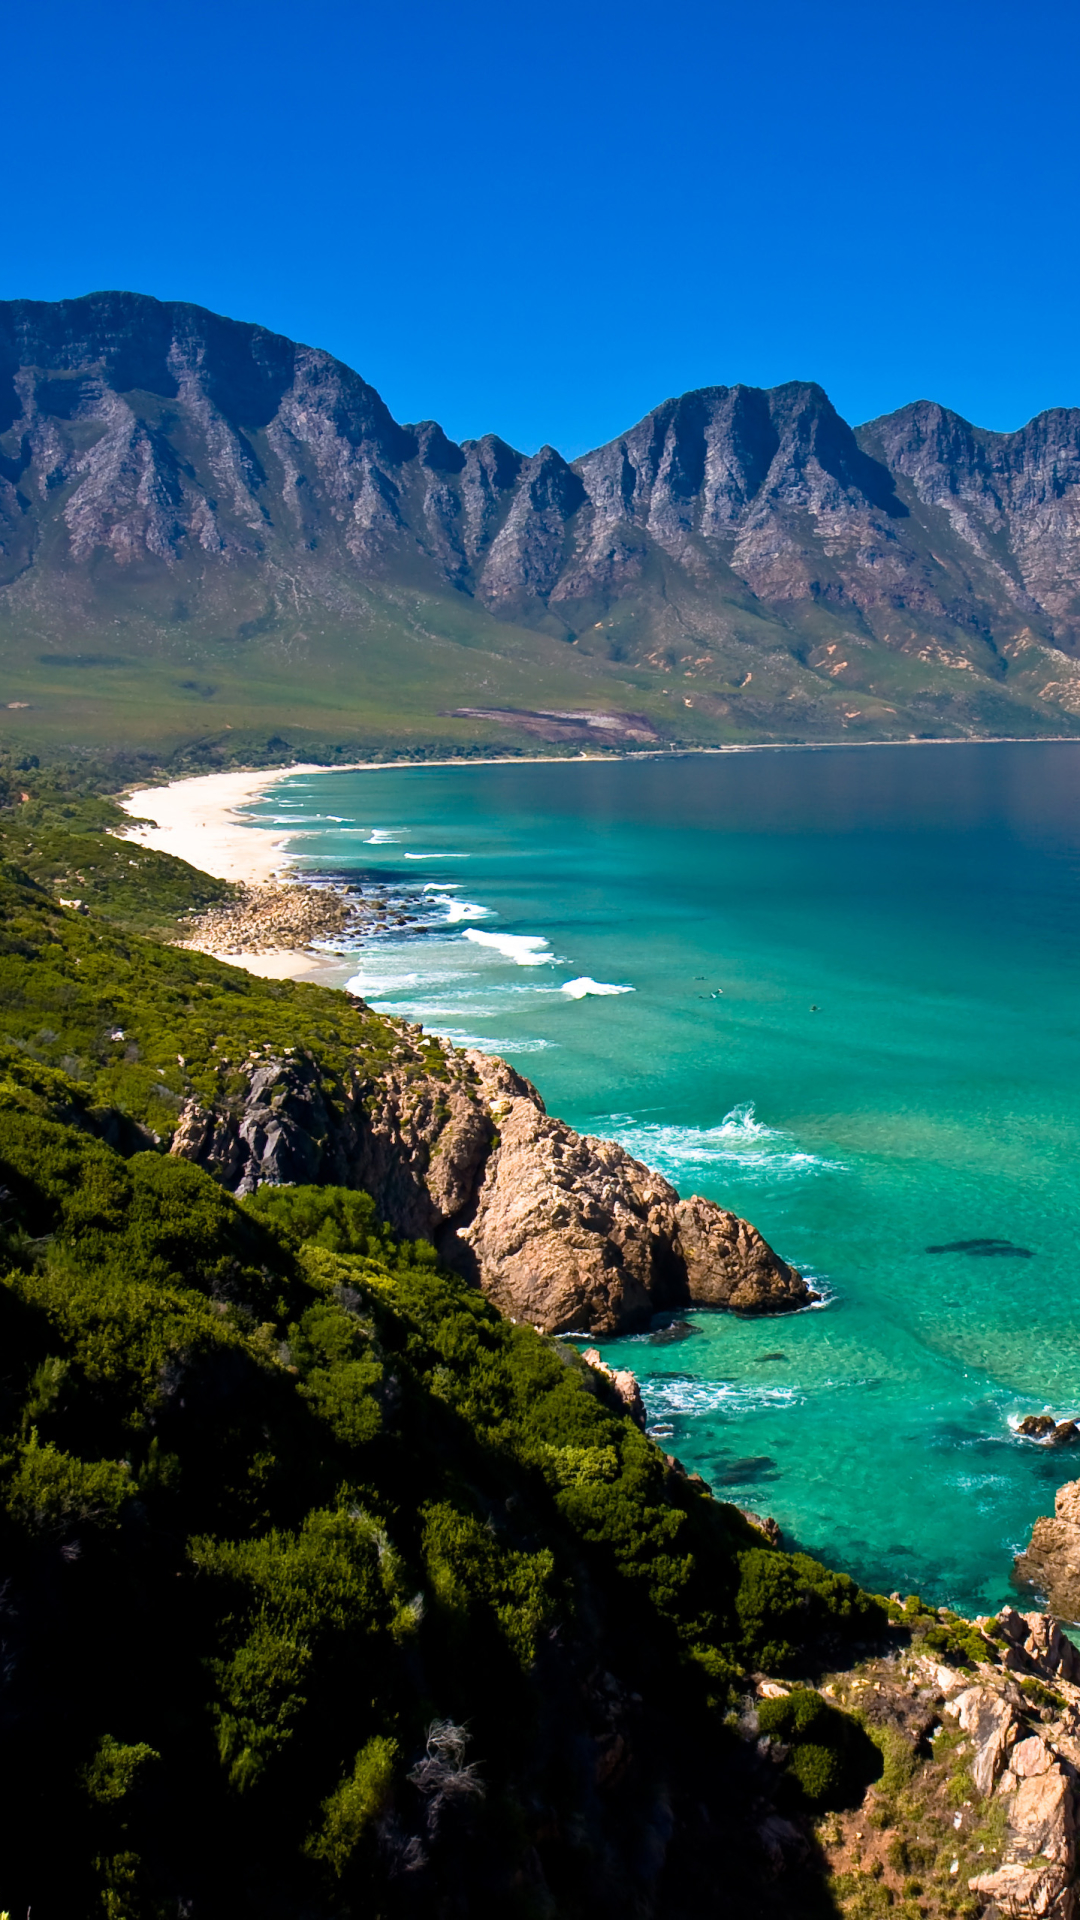 Coastline of Capetown, South Africa - Mobile Abyss